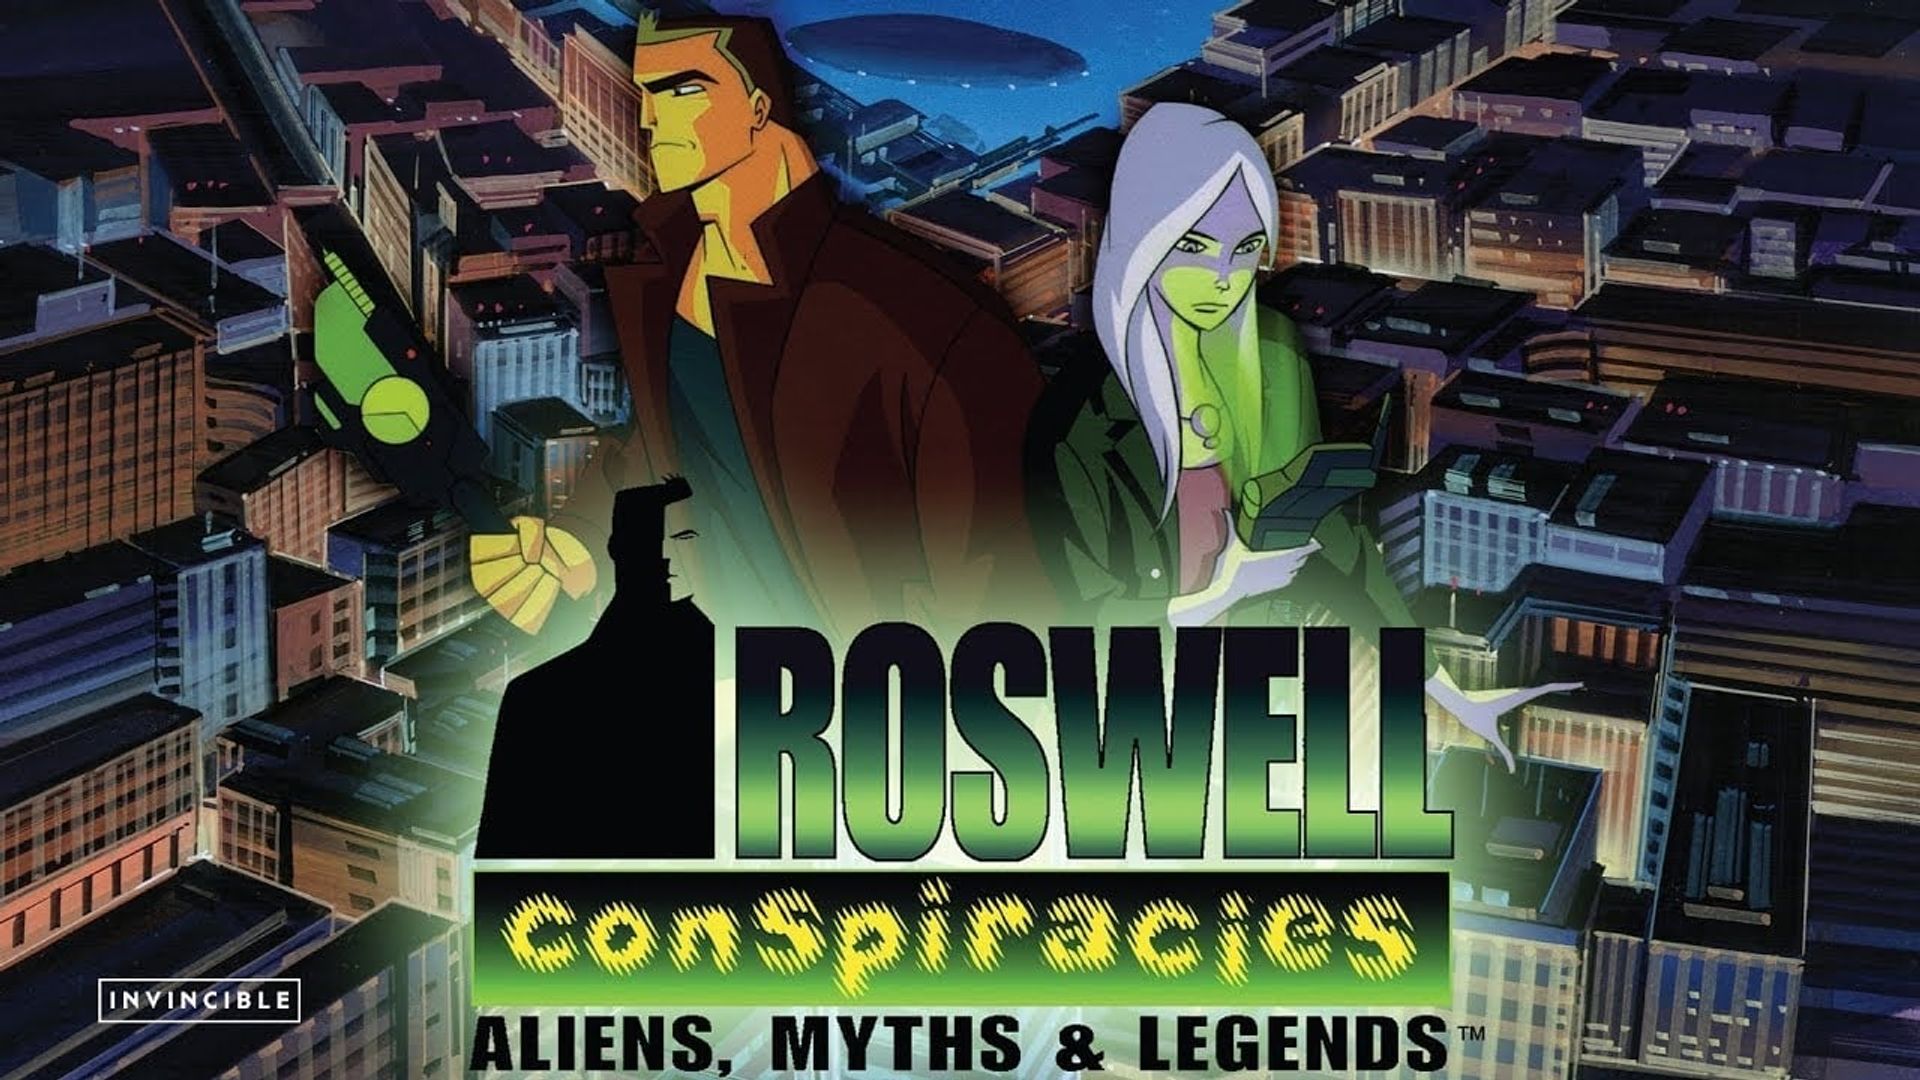 Roswell Conspiracies: Aliens, Myths & Legends background